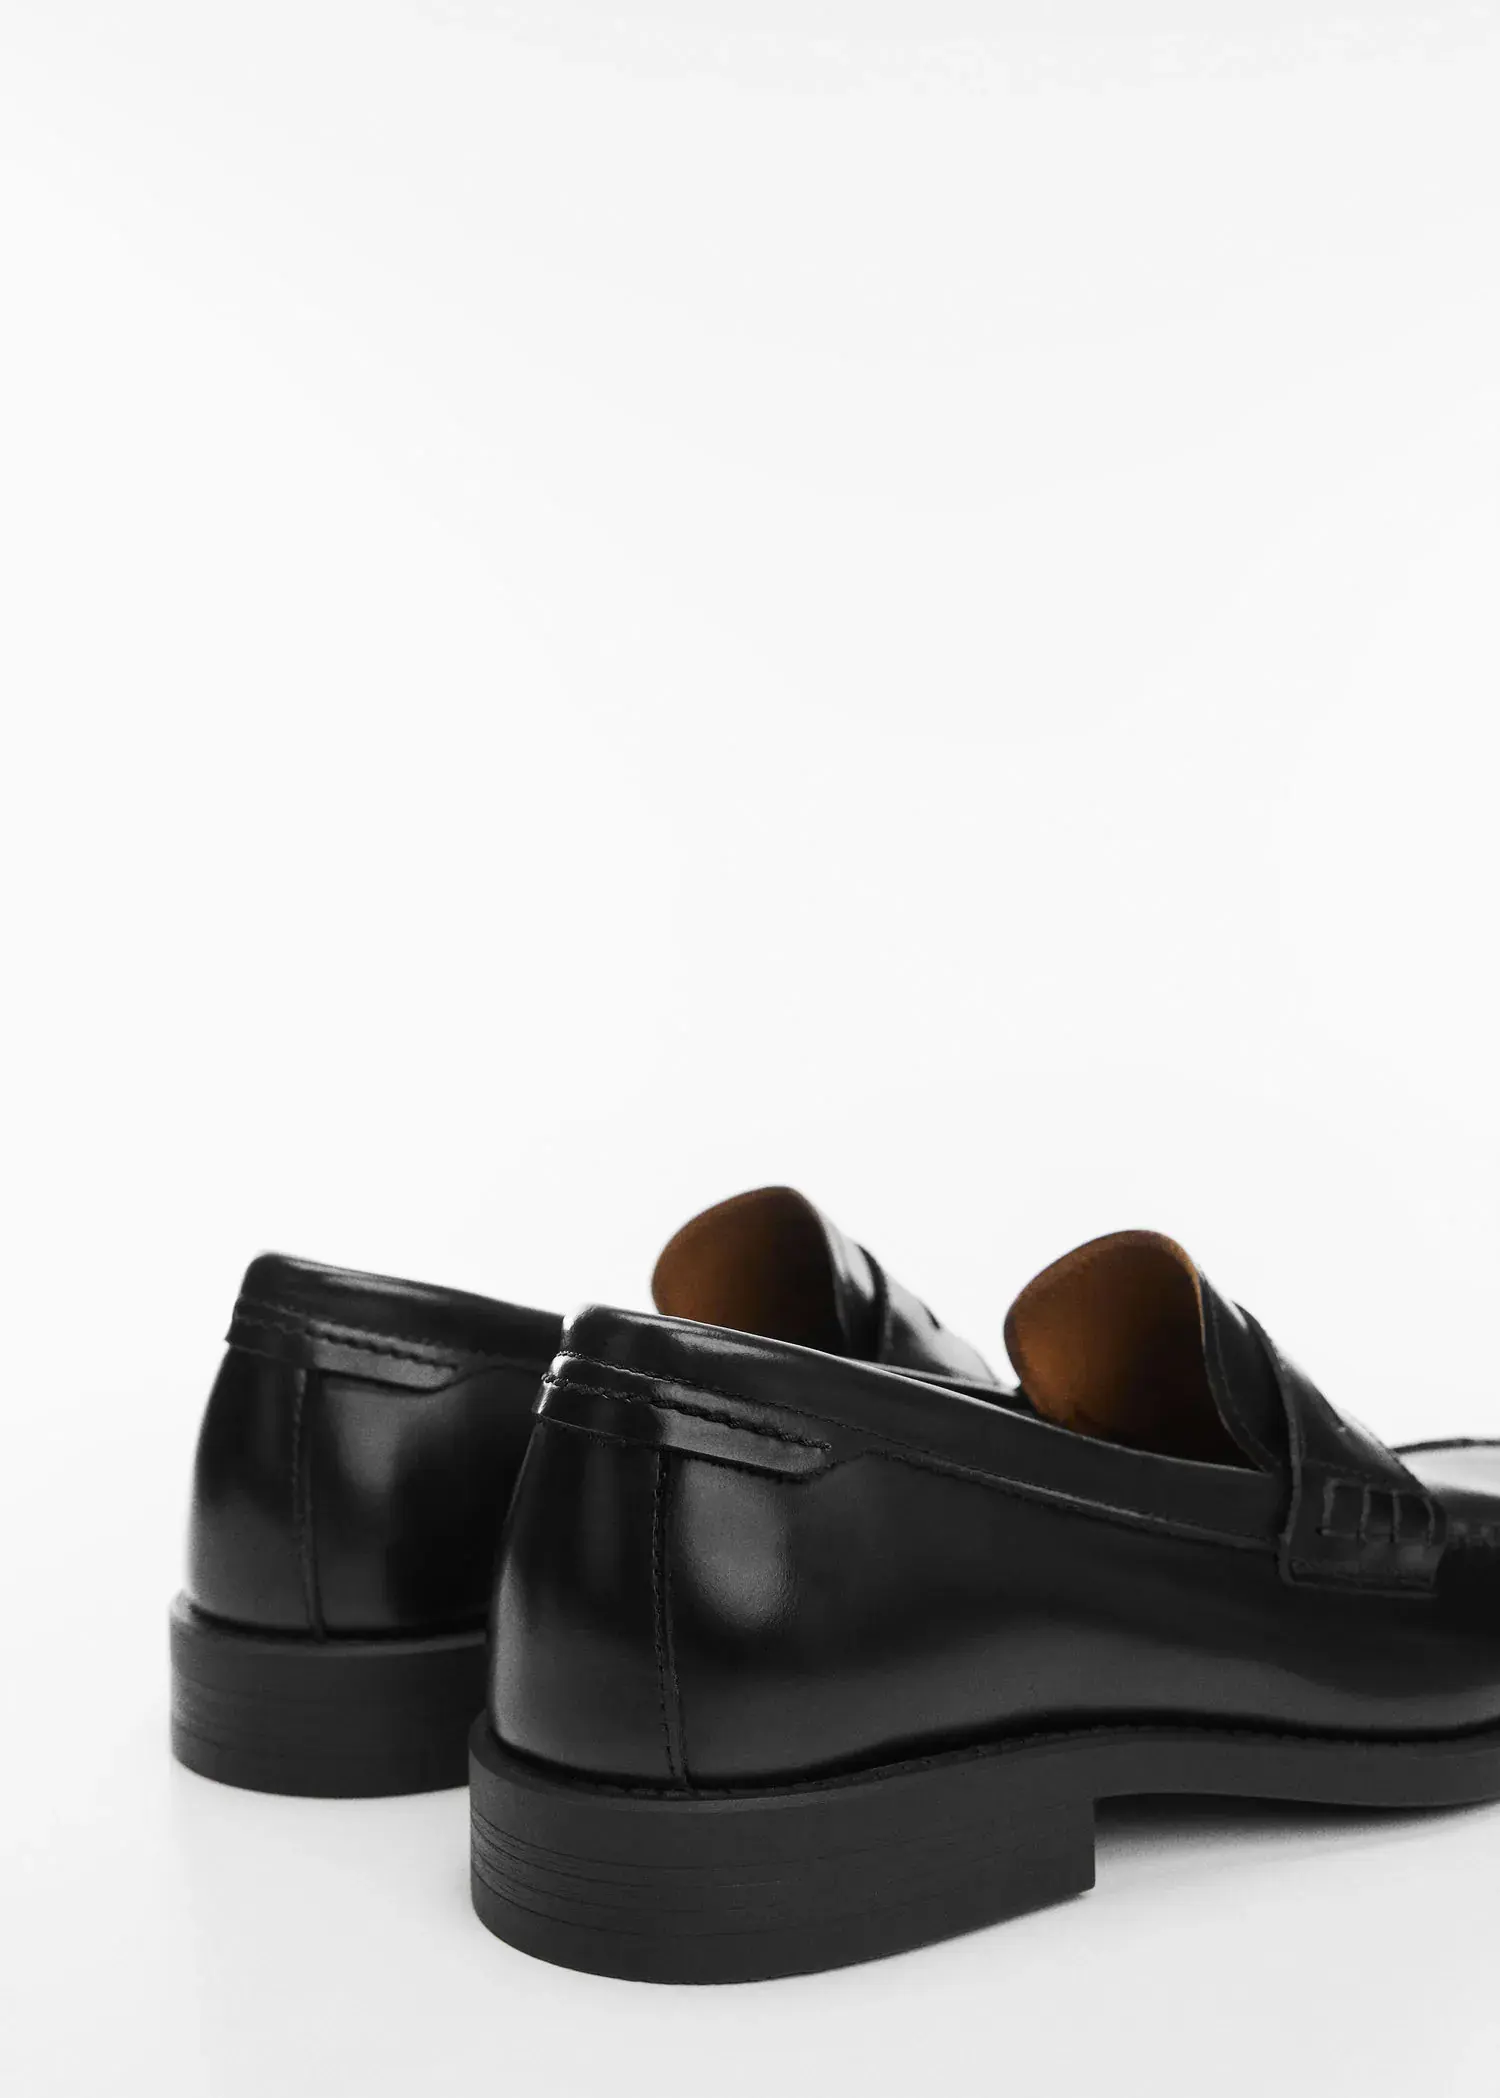 Mango Aged-leather loafers. 3